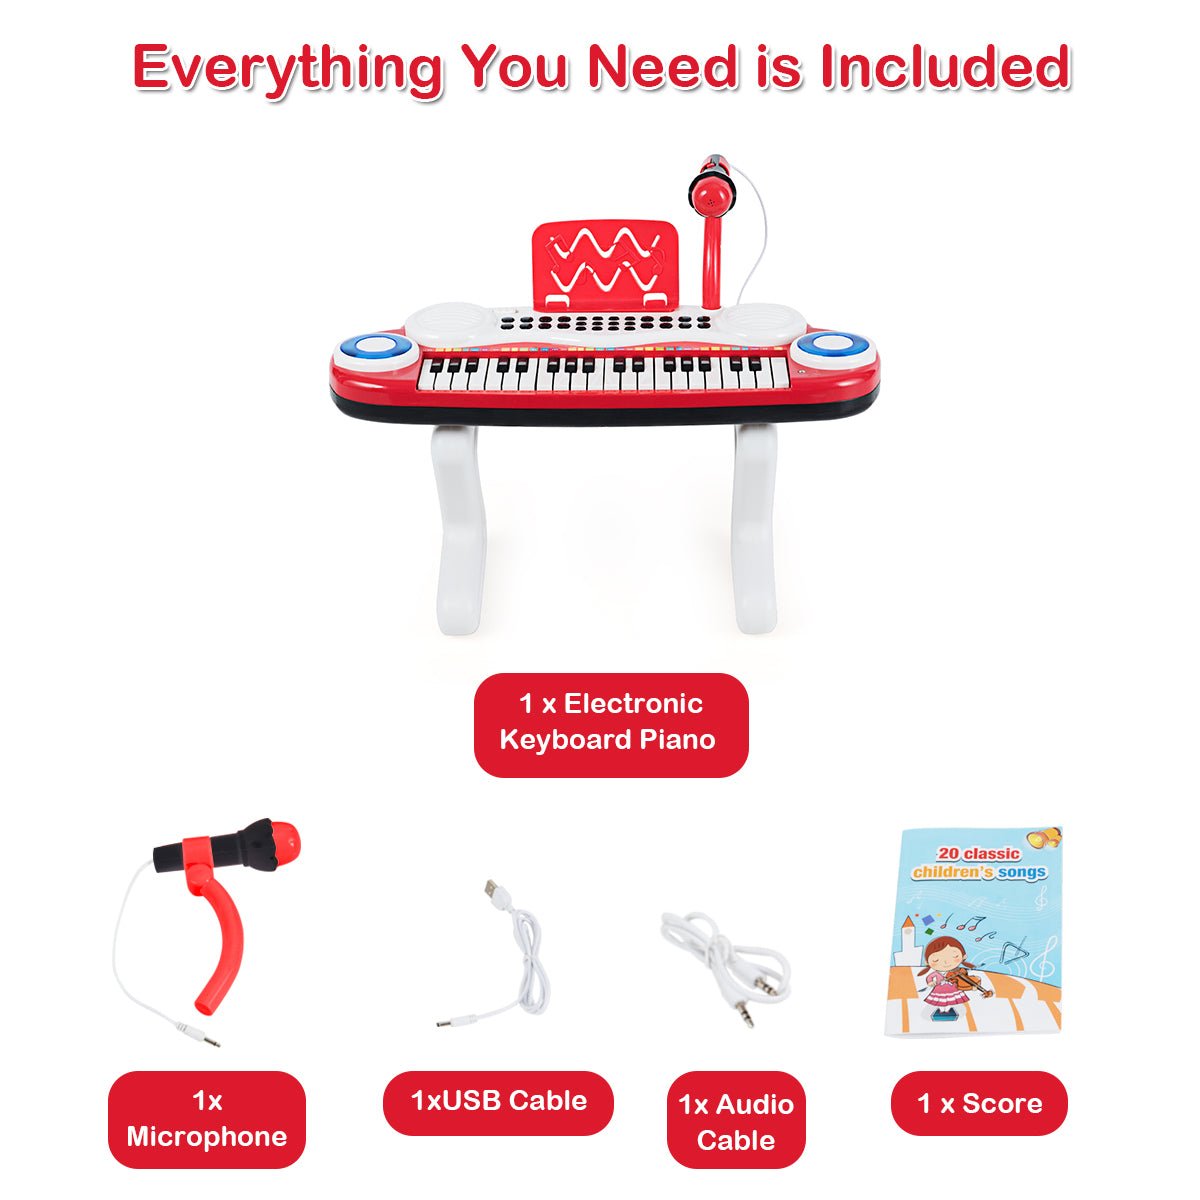 Get the Kids Red Electronic Keyboard Piano with Microphone Today